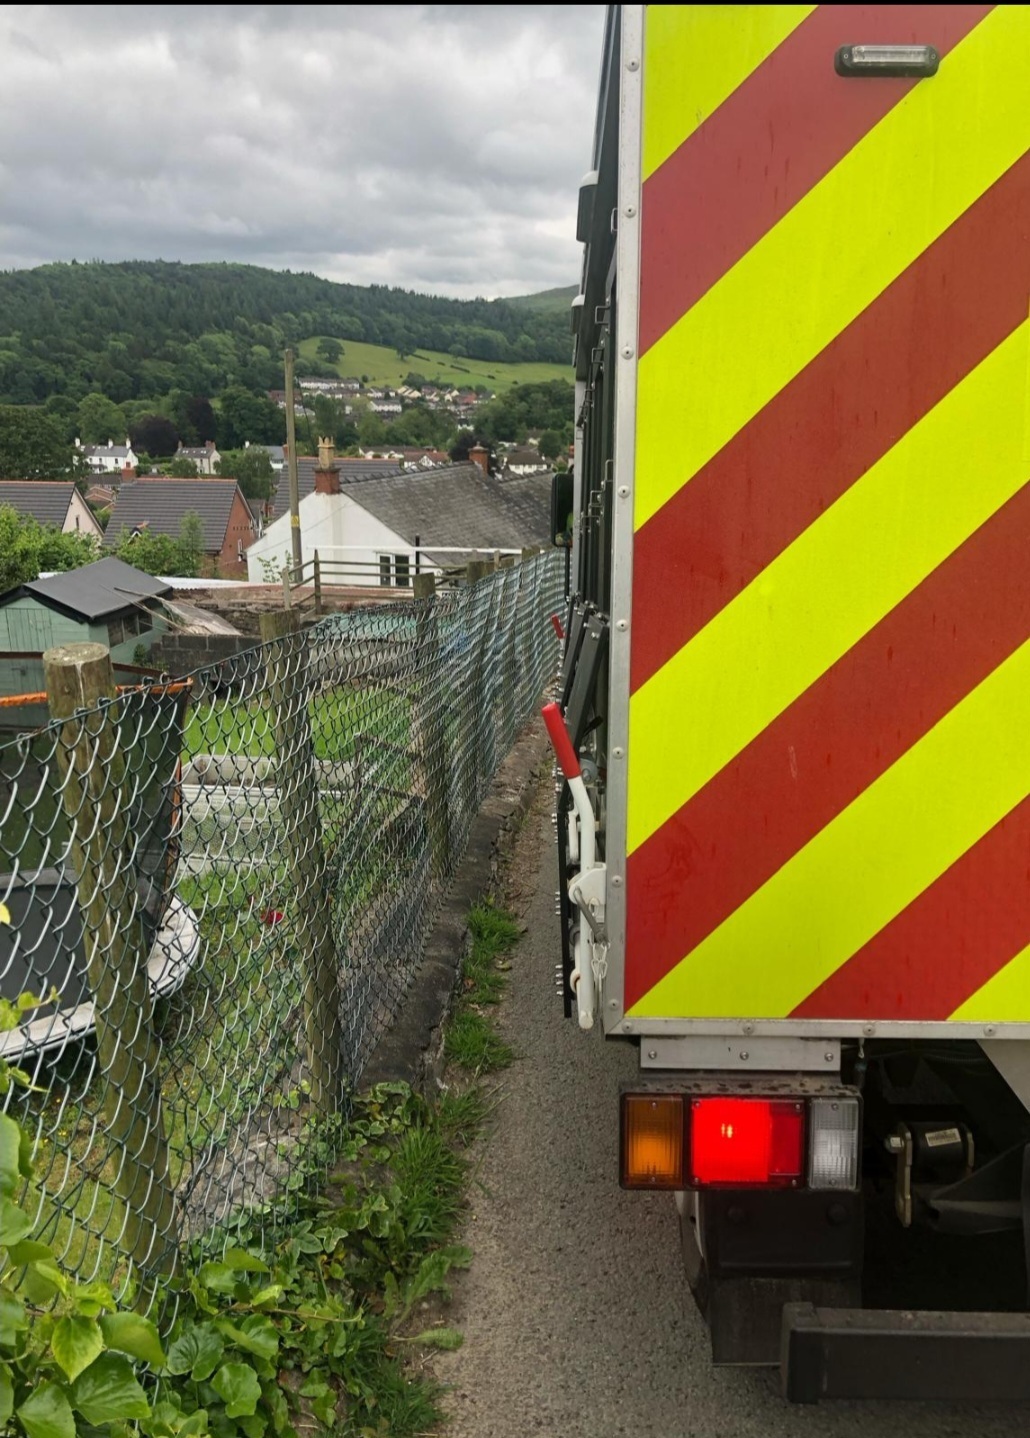 Bin wagons are struggling to get down Fron Bache, Llangollen, say residents unhappy with the council’s new recycling scheme..